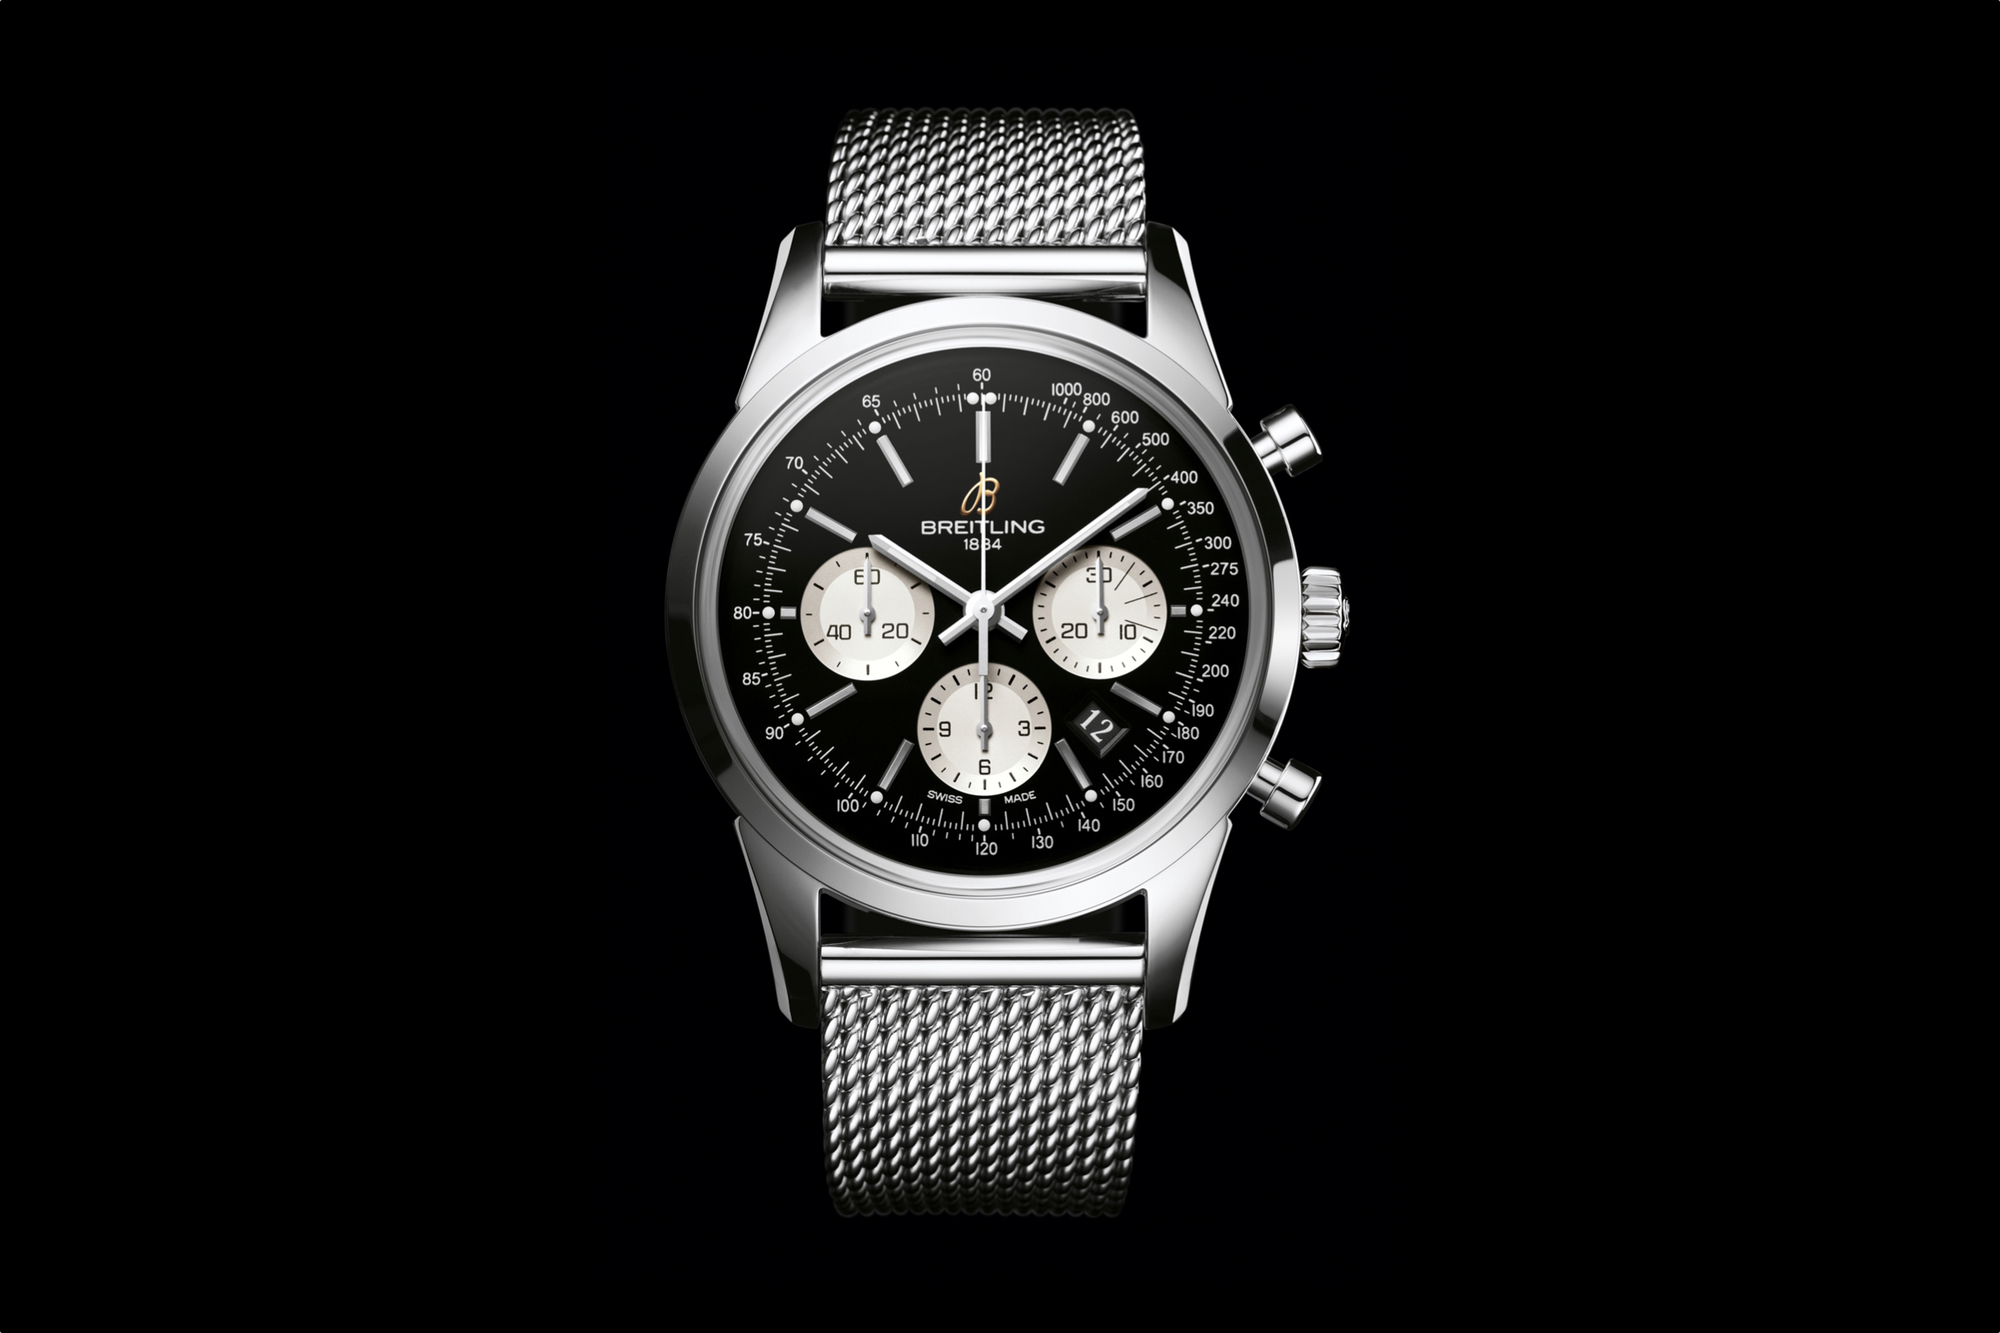 Beautiful Breitling, the Transocean Chronograph - Monochrome Watches